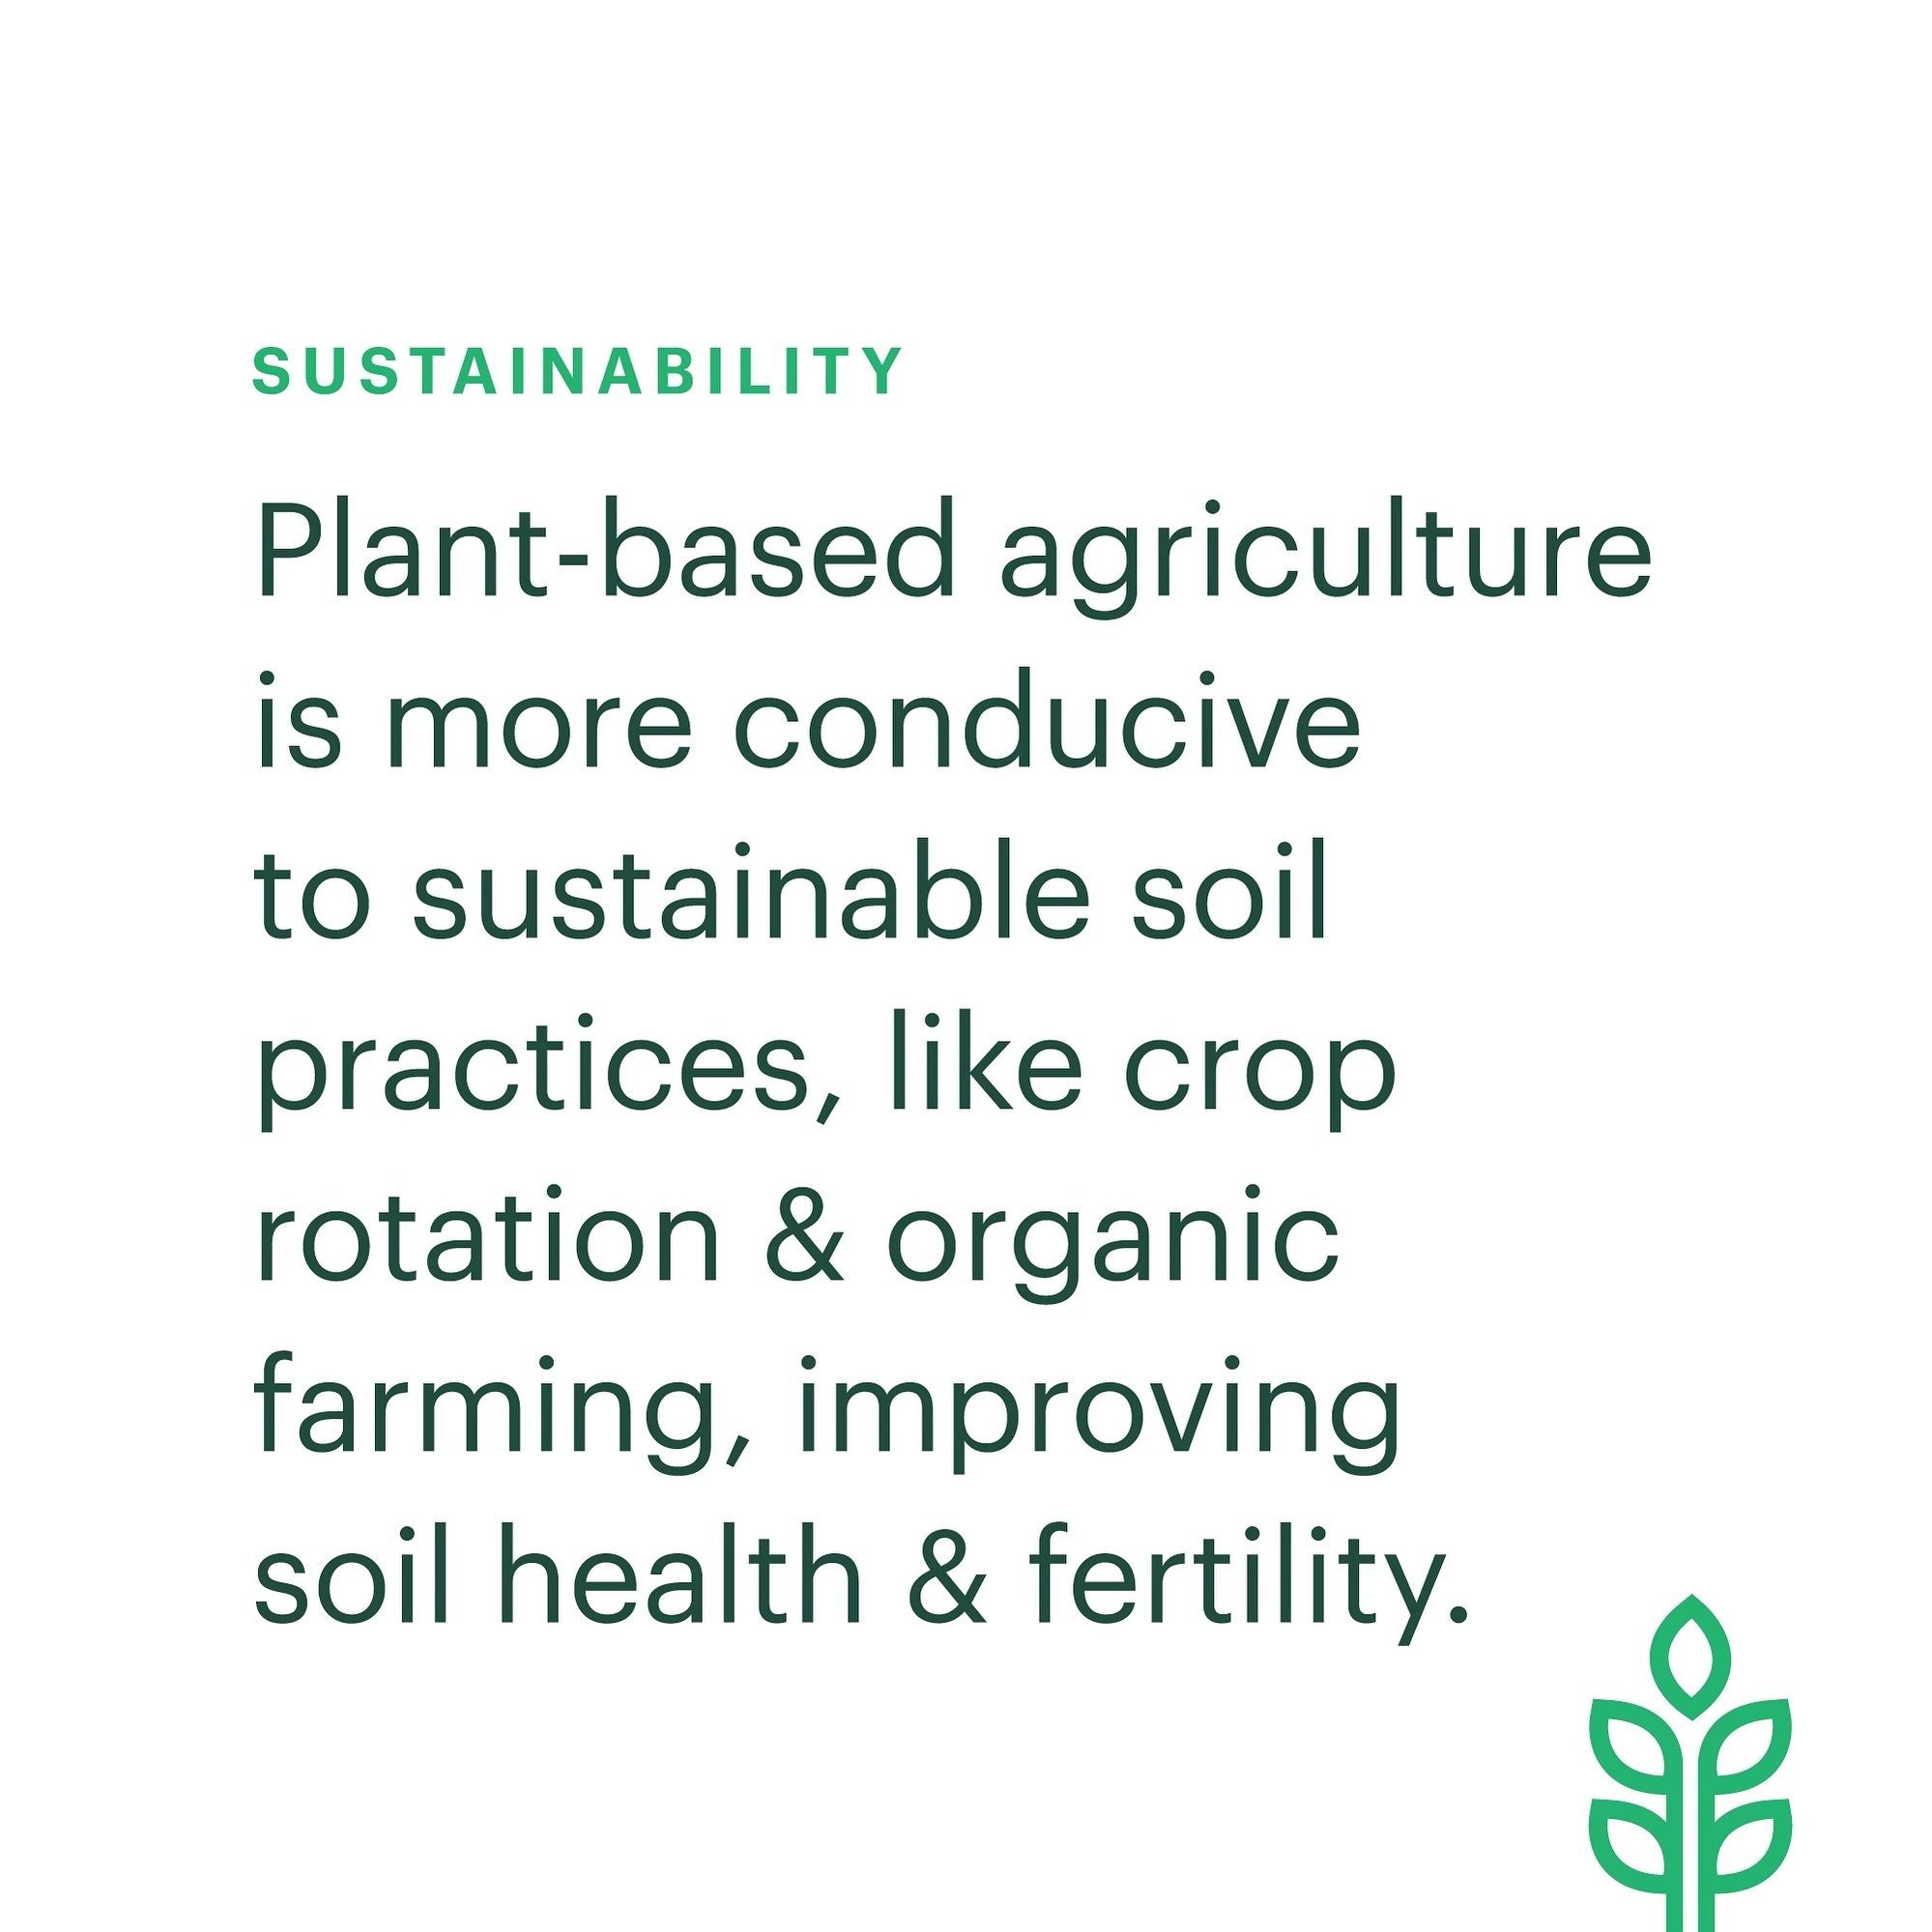 Animal agriculture often results in significant soil degradation due to various factors including overgrazing, soil compaction, and the heavy use of chemical fertilizers necessary for growing feed crops. Overgrazing strips the soil of its grass cover